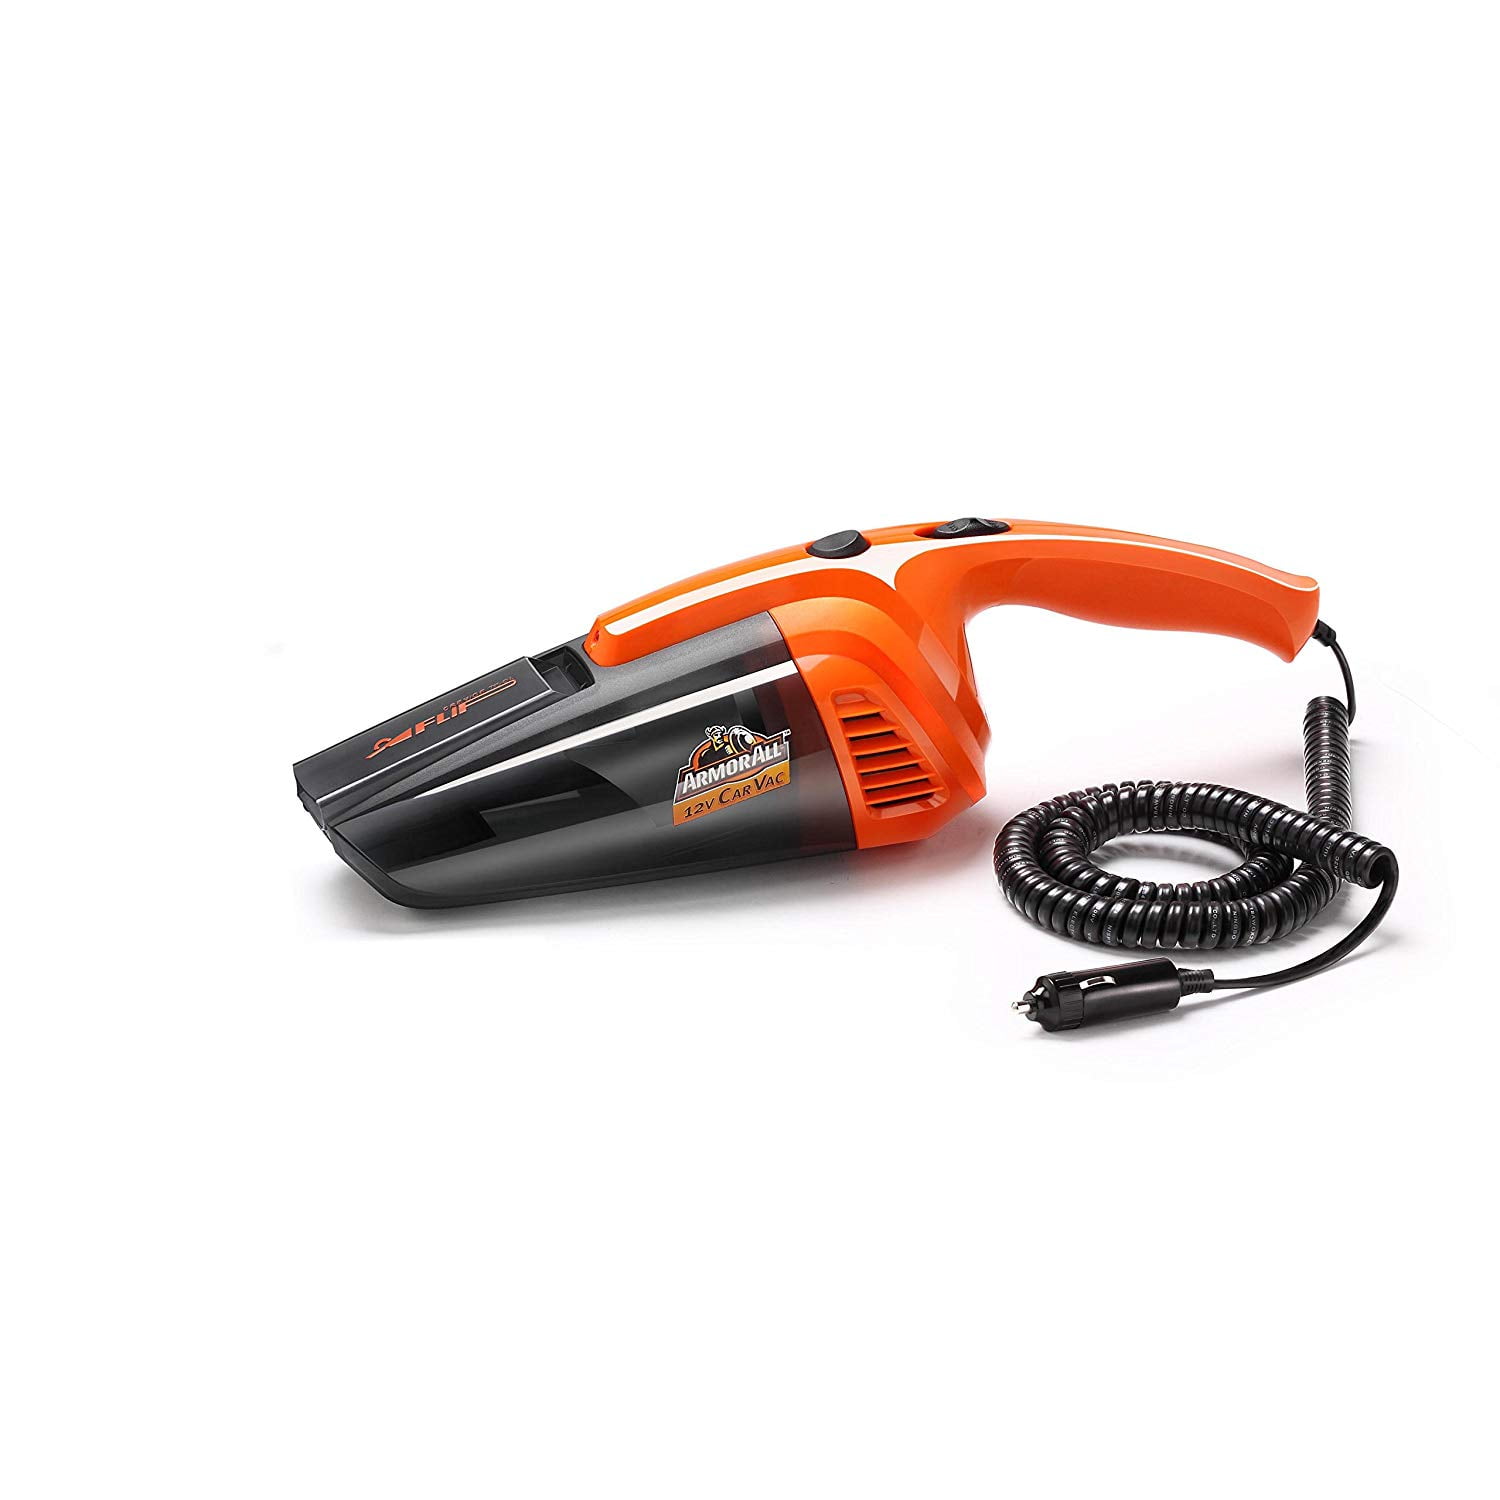 AA12V1 0901 Auto Handheld Vacuum For Wet and Dry w/ Bag Details about   Armor All 12V Car Vac 